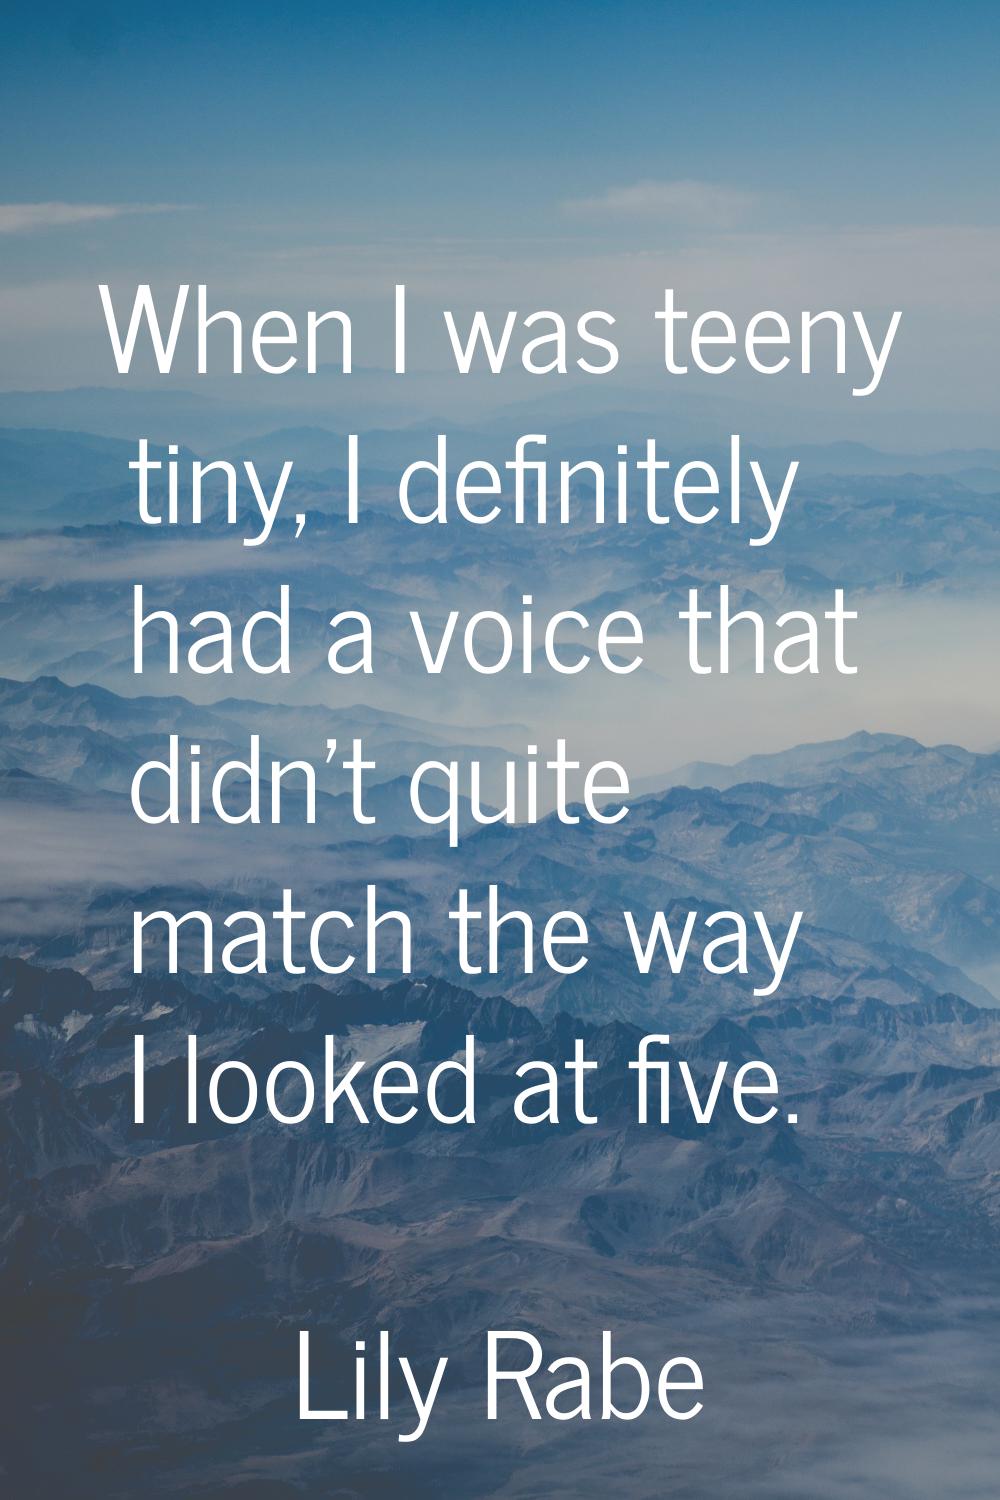 When I was teeny tiny, I definitely had a voice that didn't quite match the way I looked at five.